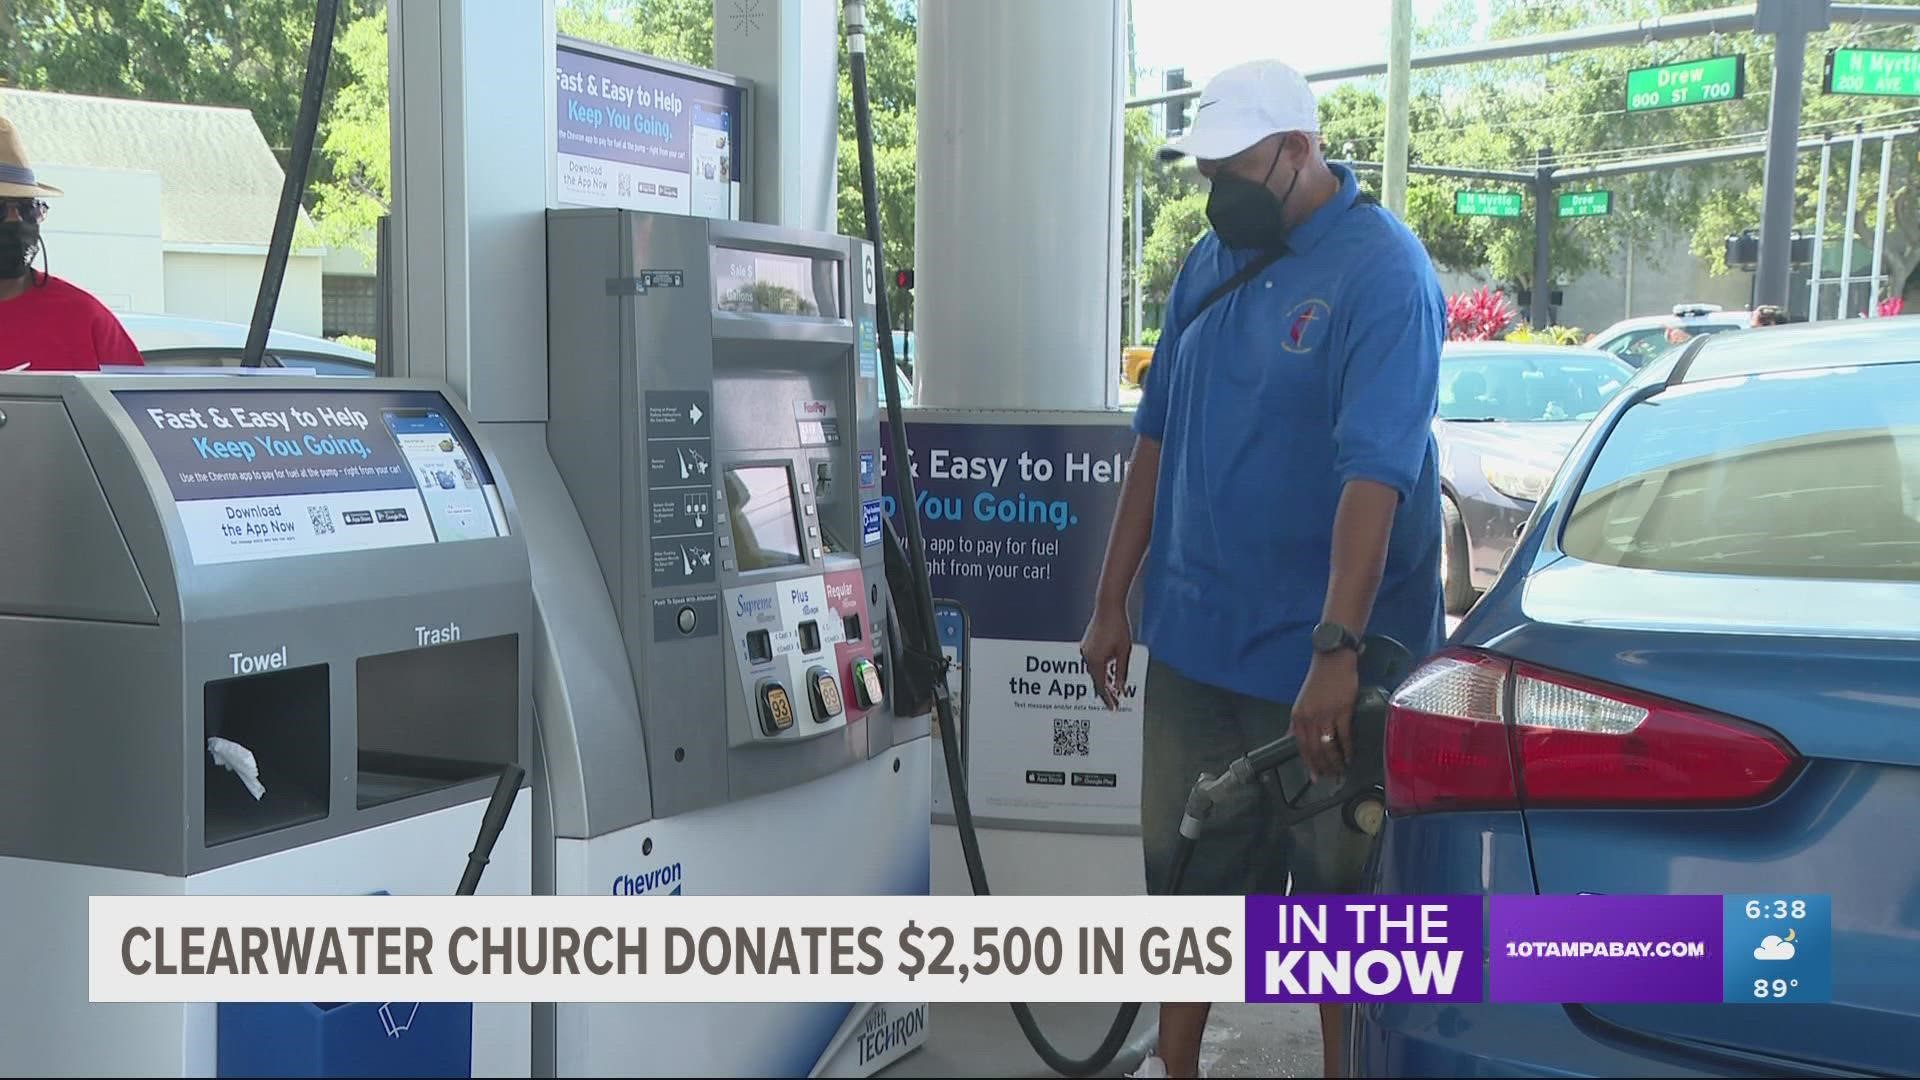 As Americans find themselves struggling to keep their cars filled, a Clearwater church says it will give away fuel Sunday in an act of morning service.